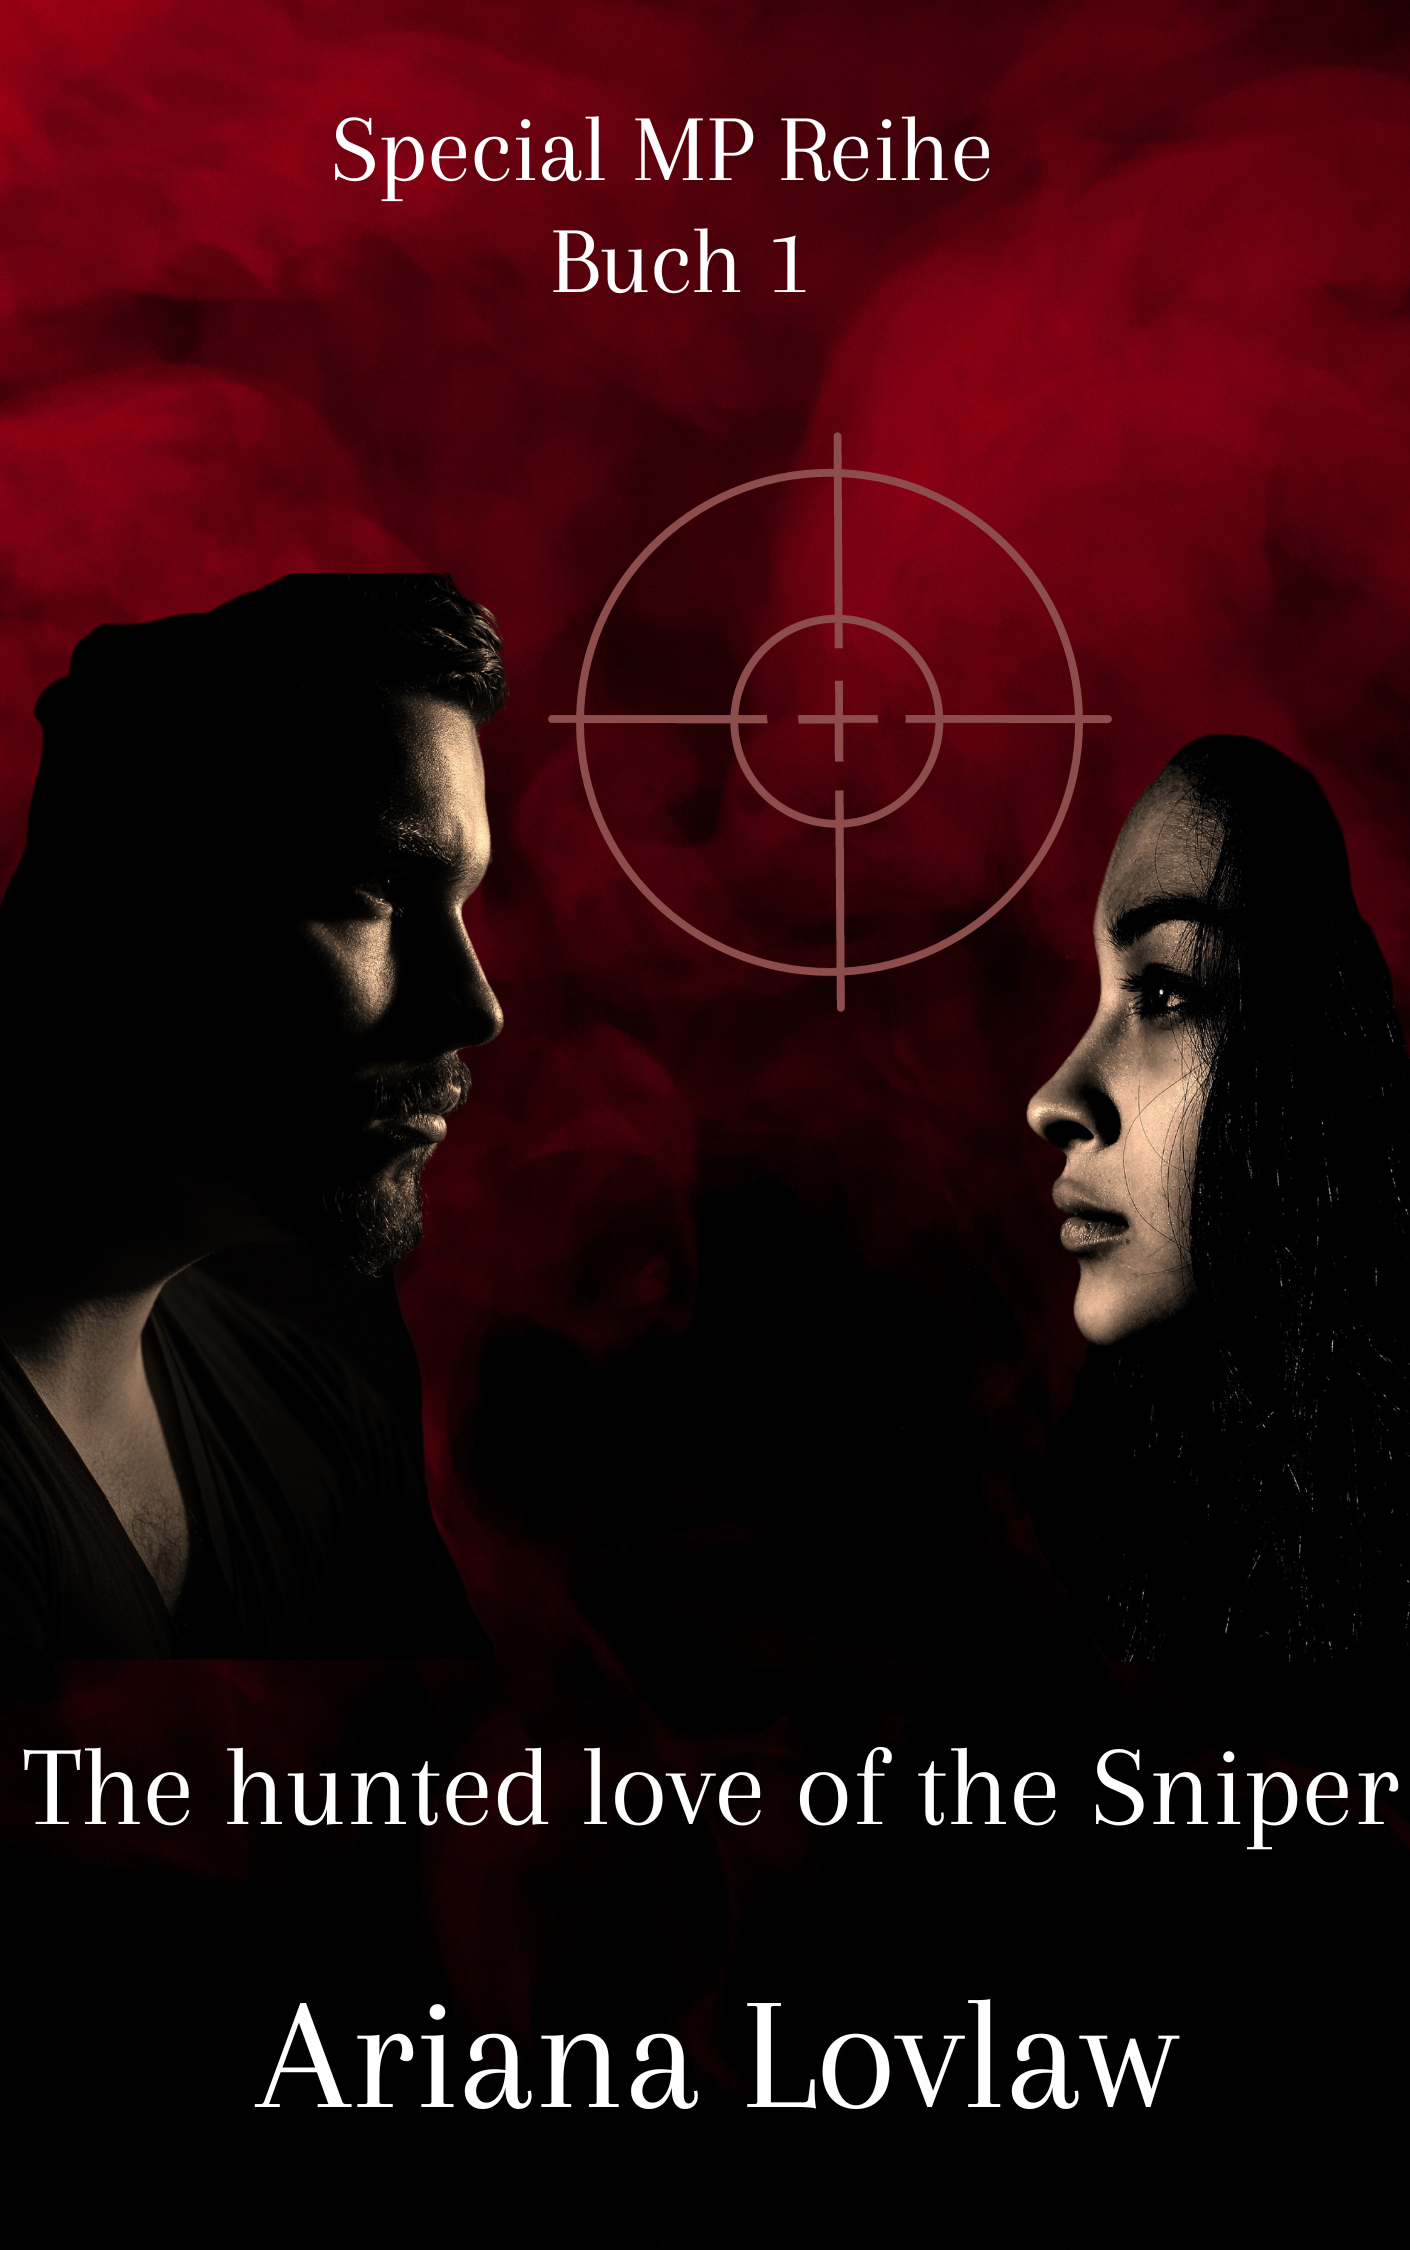 The hunted love of the sniper